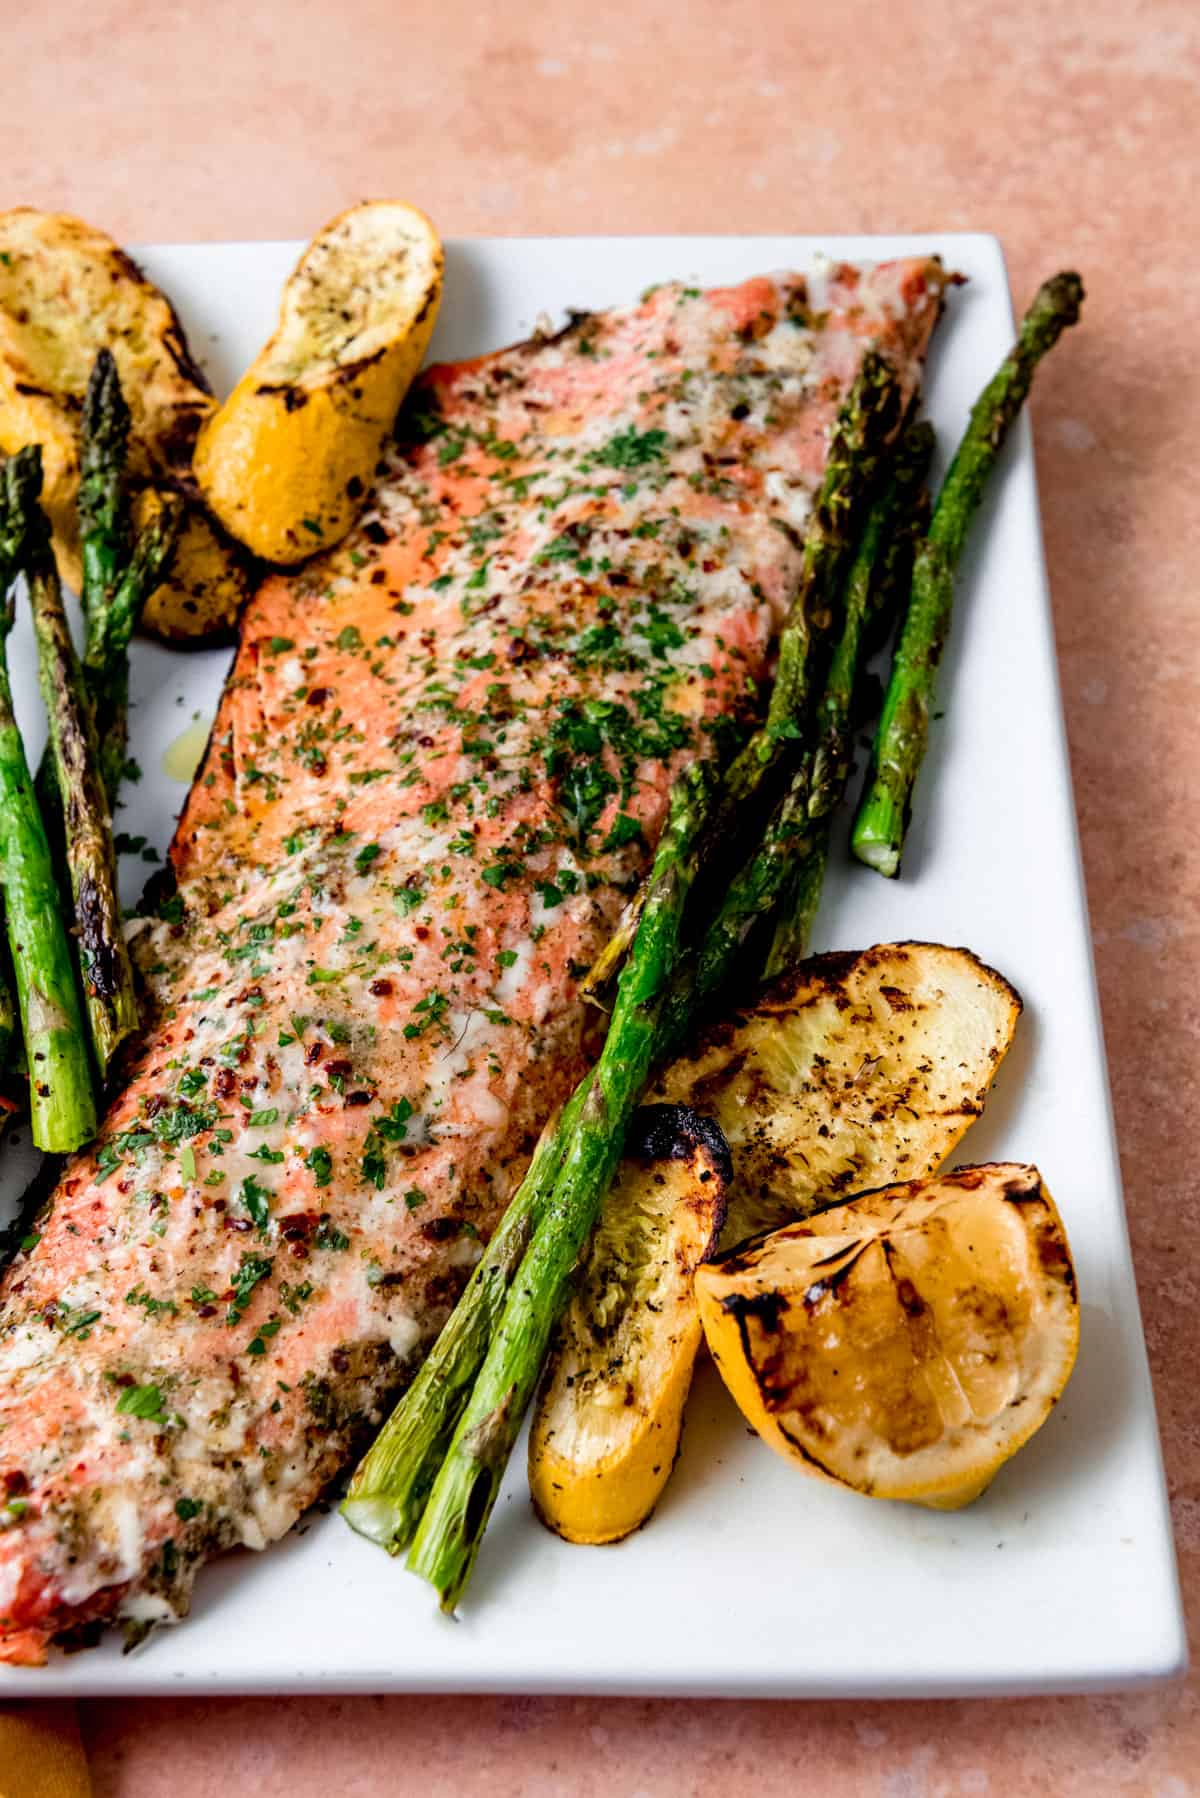 Grilled sockeye salmon with grilled vegetables.